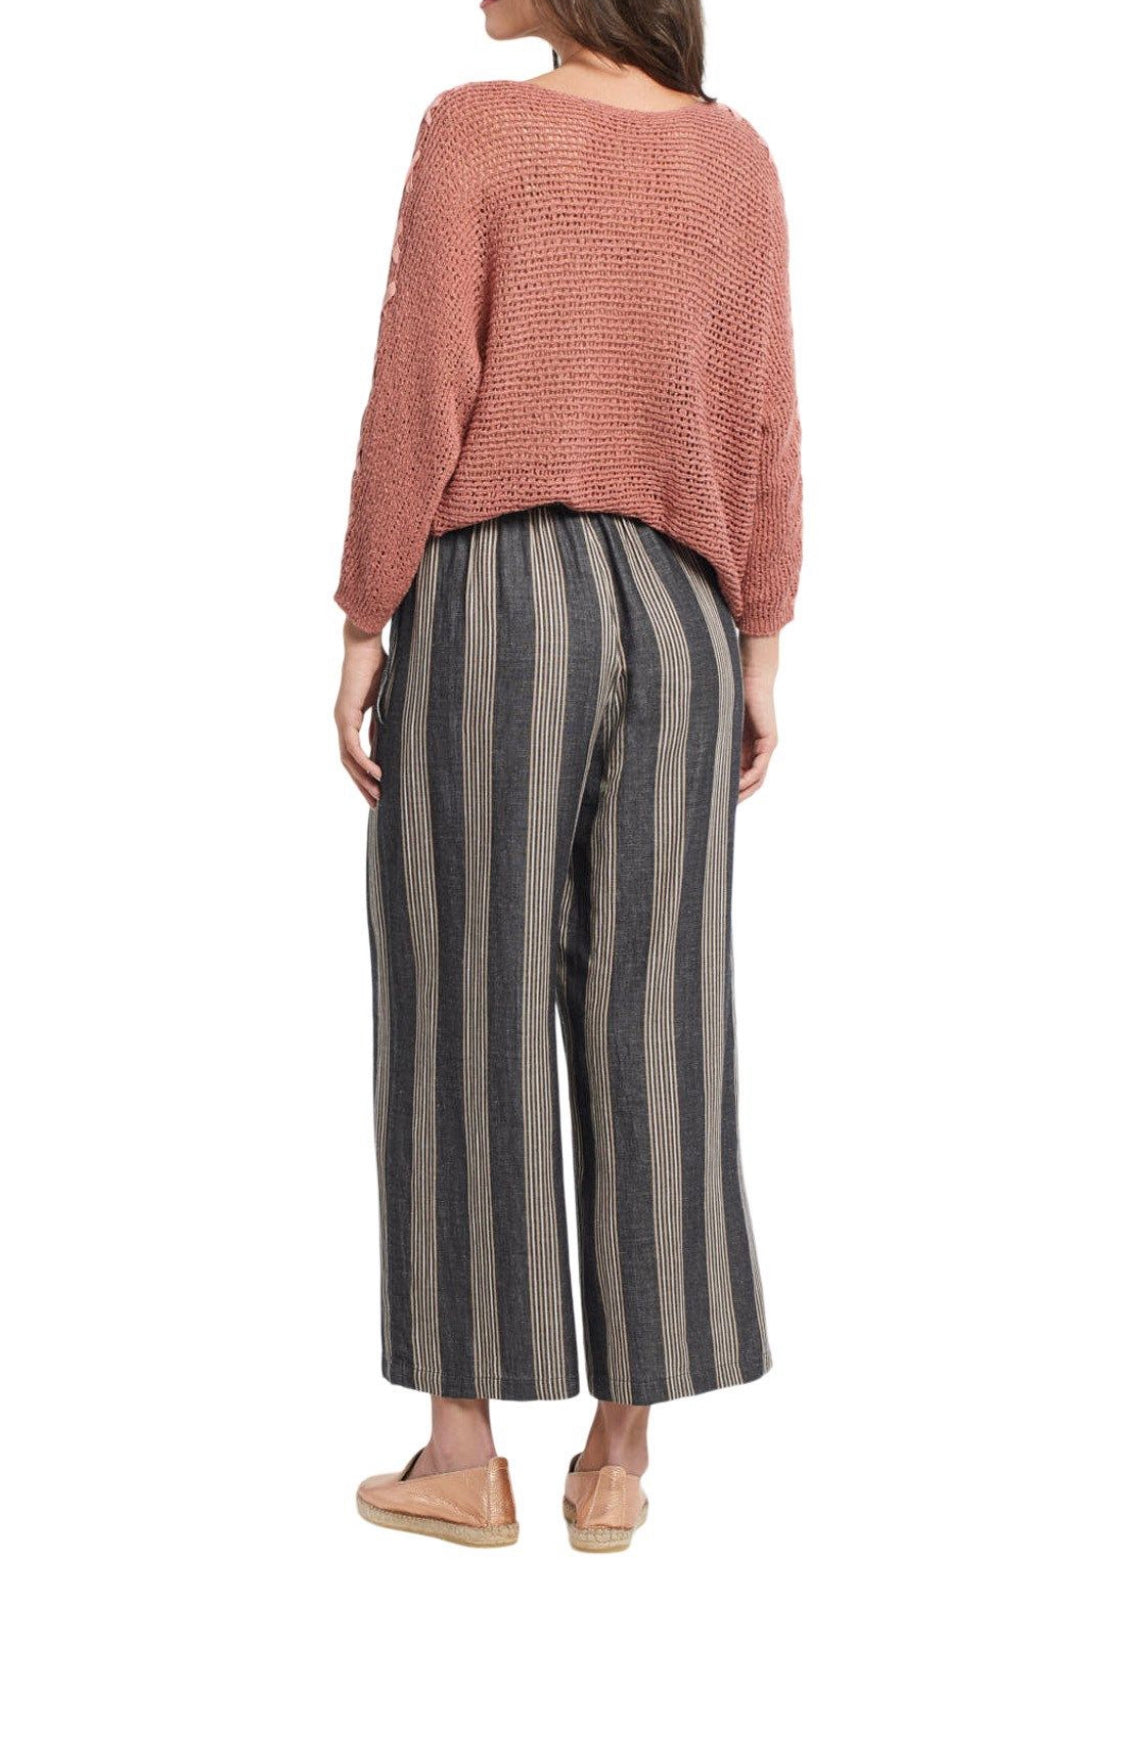 TRIBAL pull on crop pant. SMALL